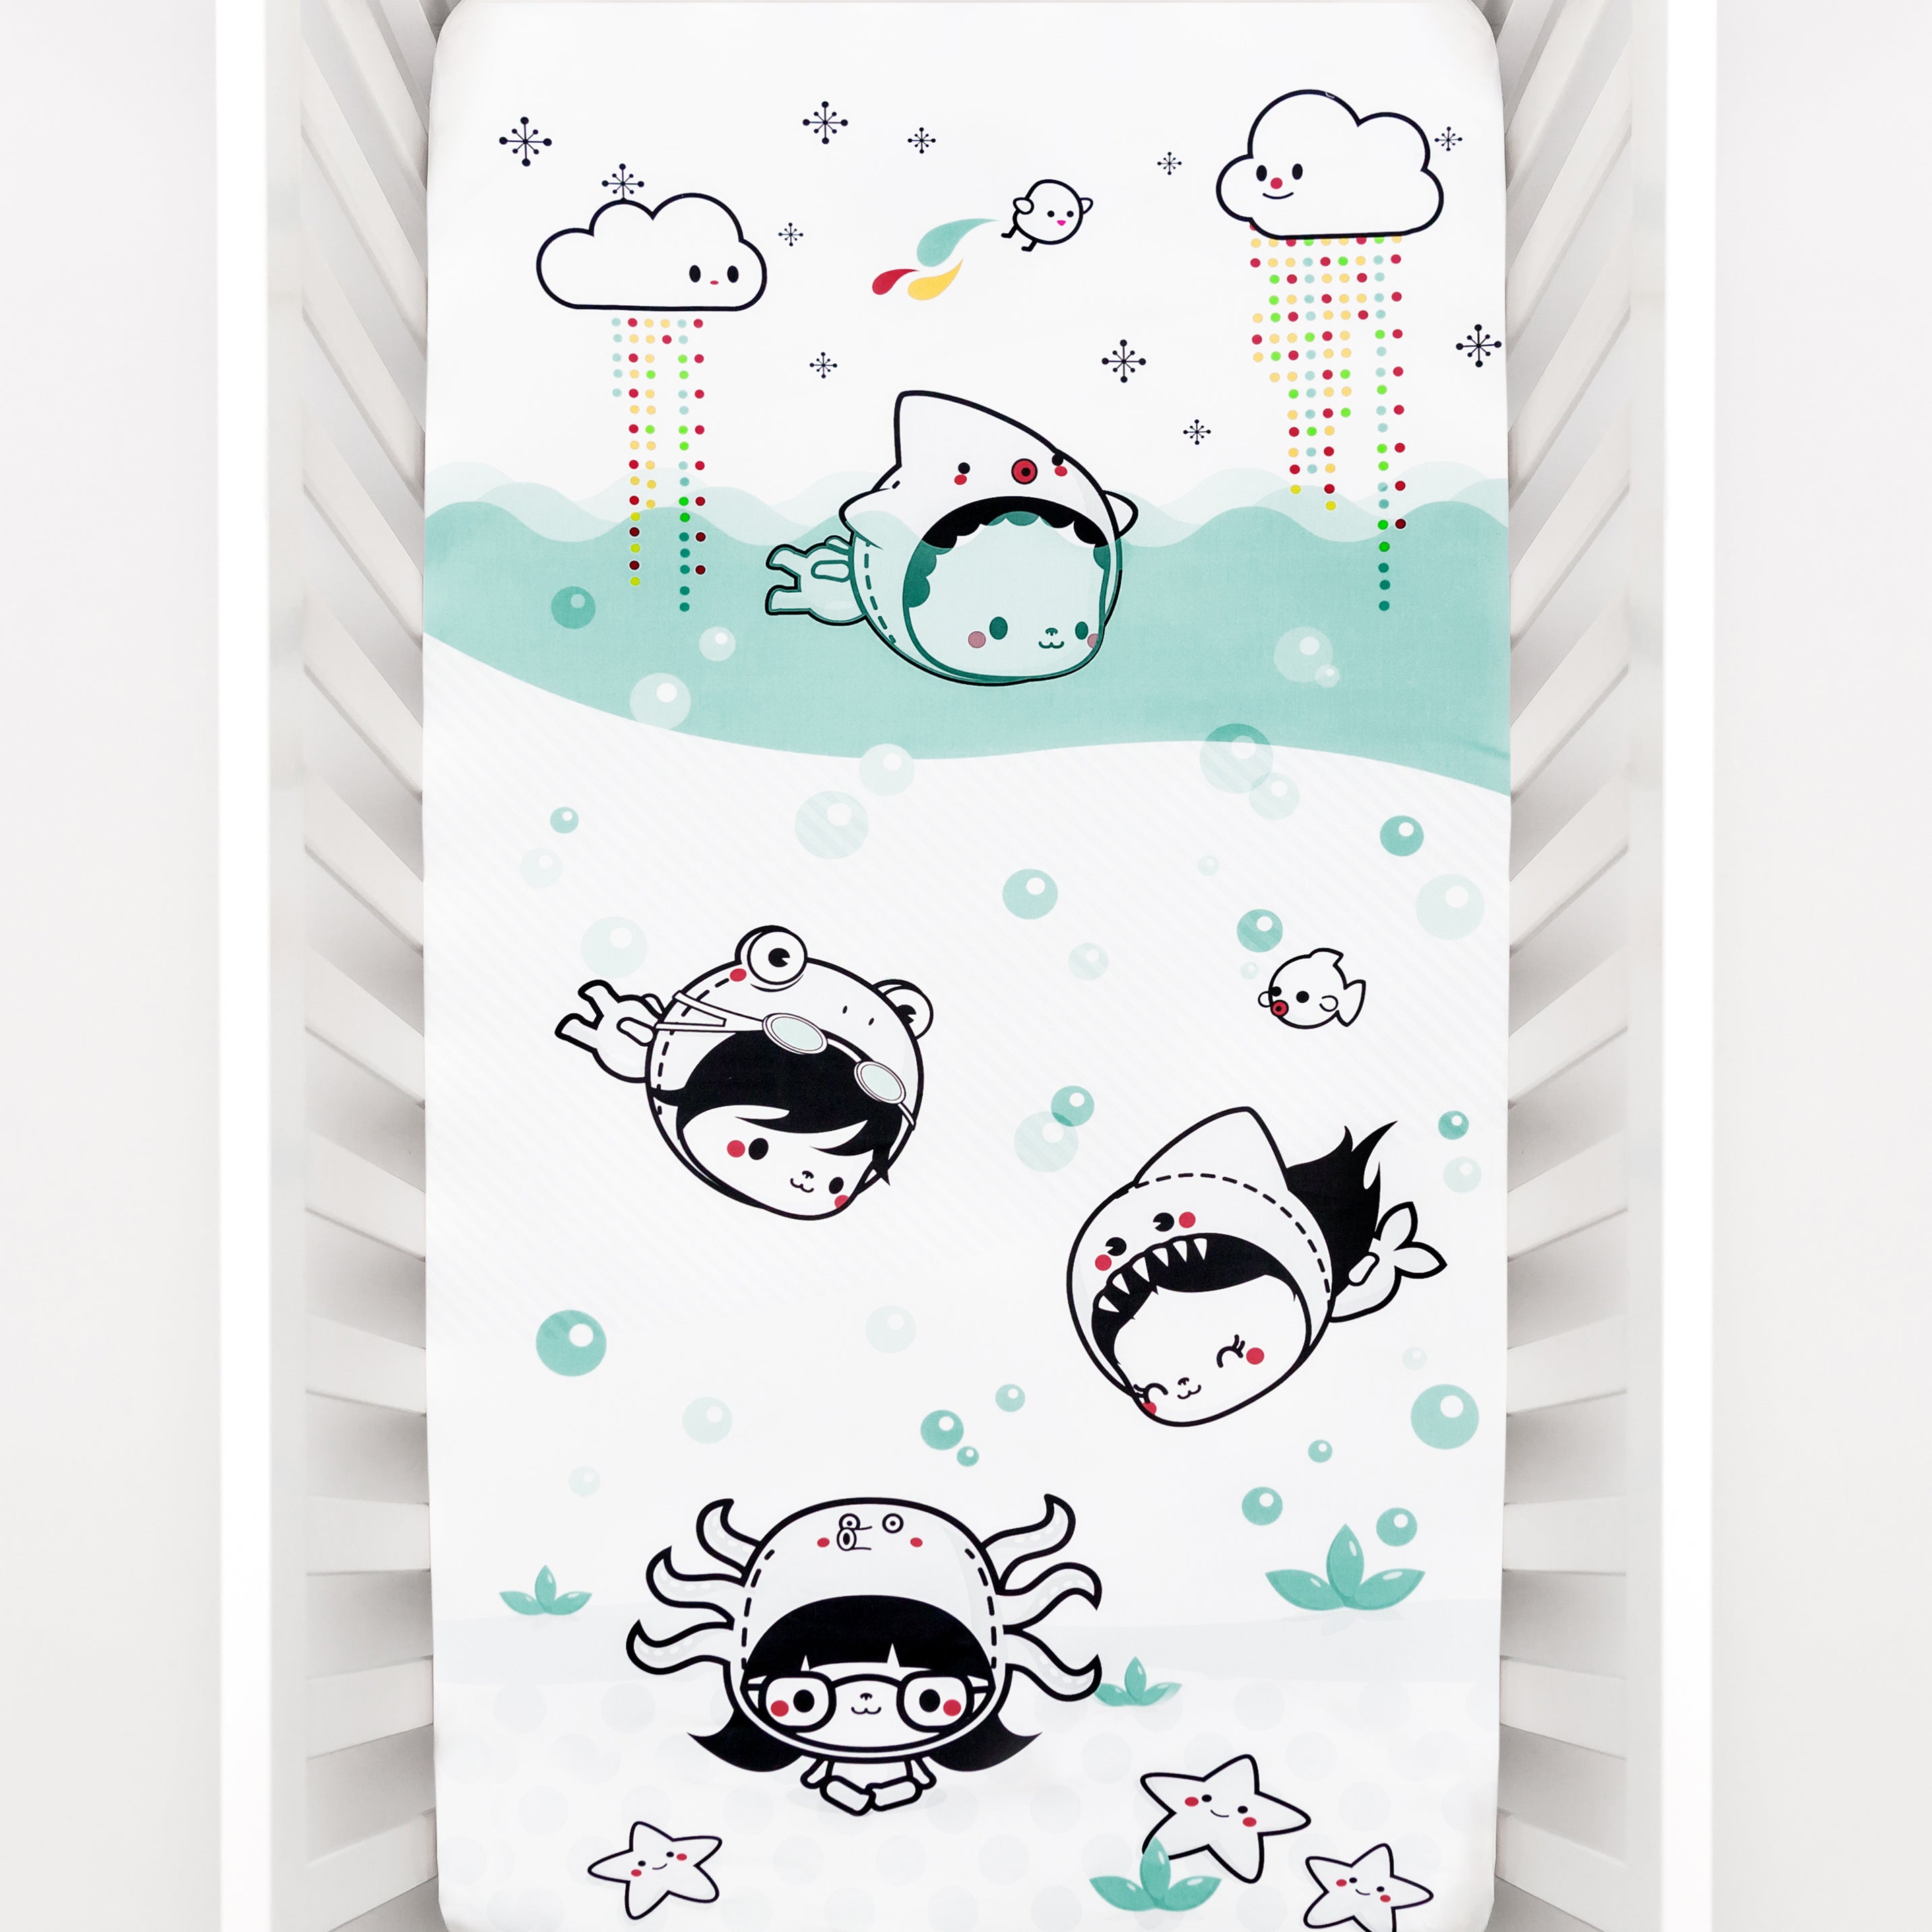 Fitted baby crib sheet by Rookie Humans, Dive In. Illustrated by Elisa Sassi. Designed for the modern nursery, packaged to make a unique baby shower gift. Underwater theme, under the sea nursery theme, under the ocean nursery theme, nautical nursery theme.